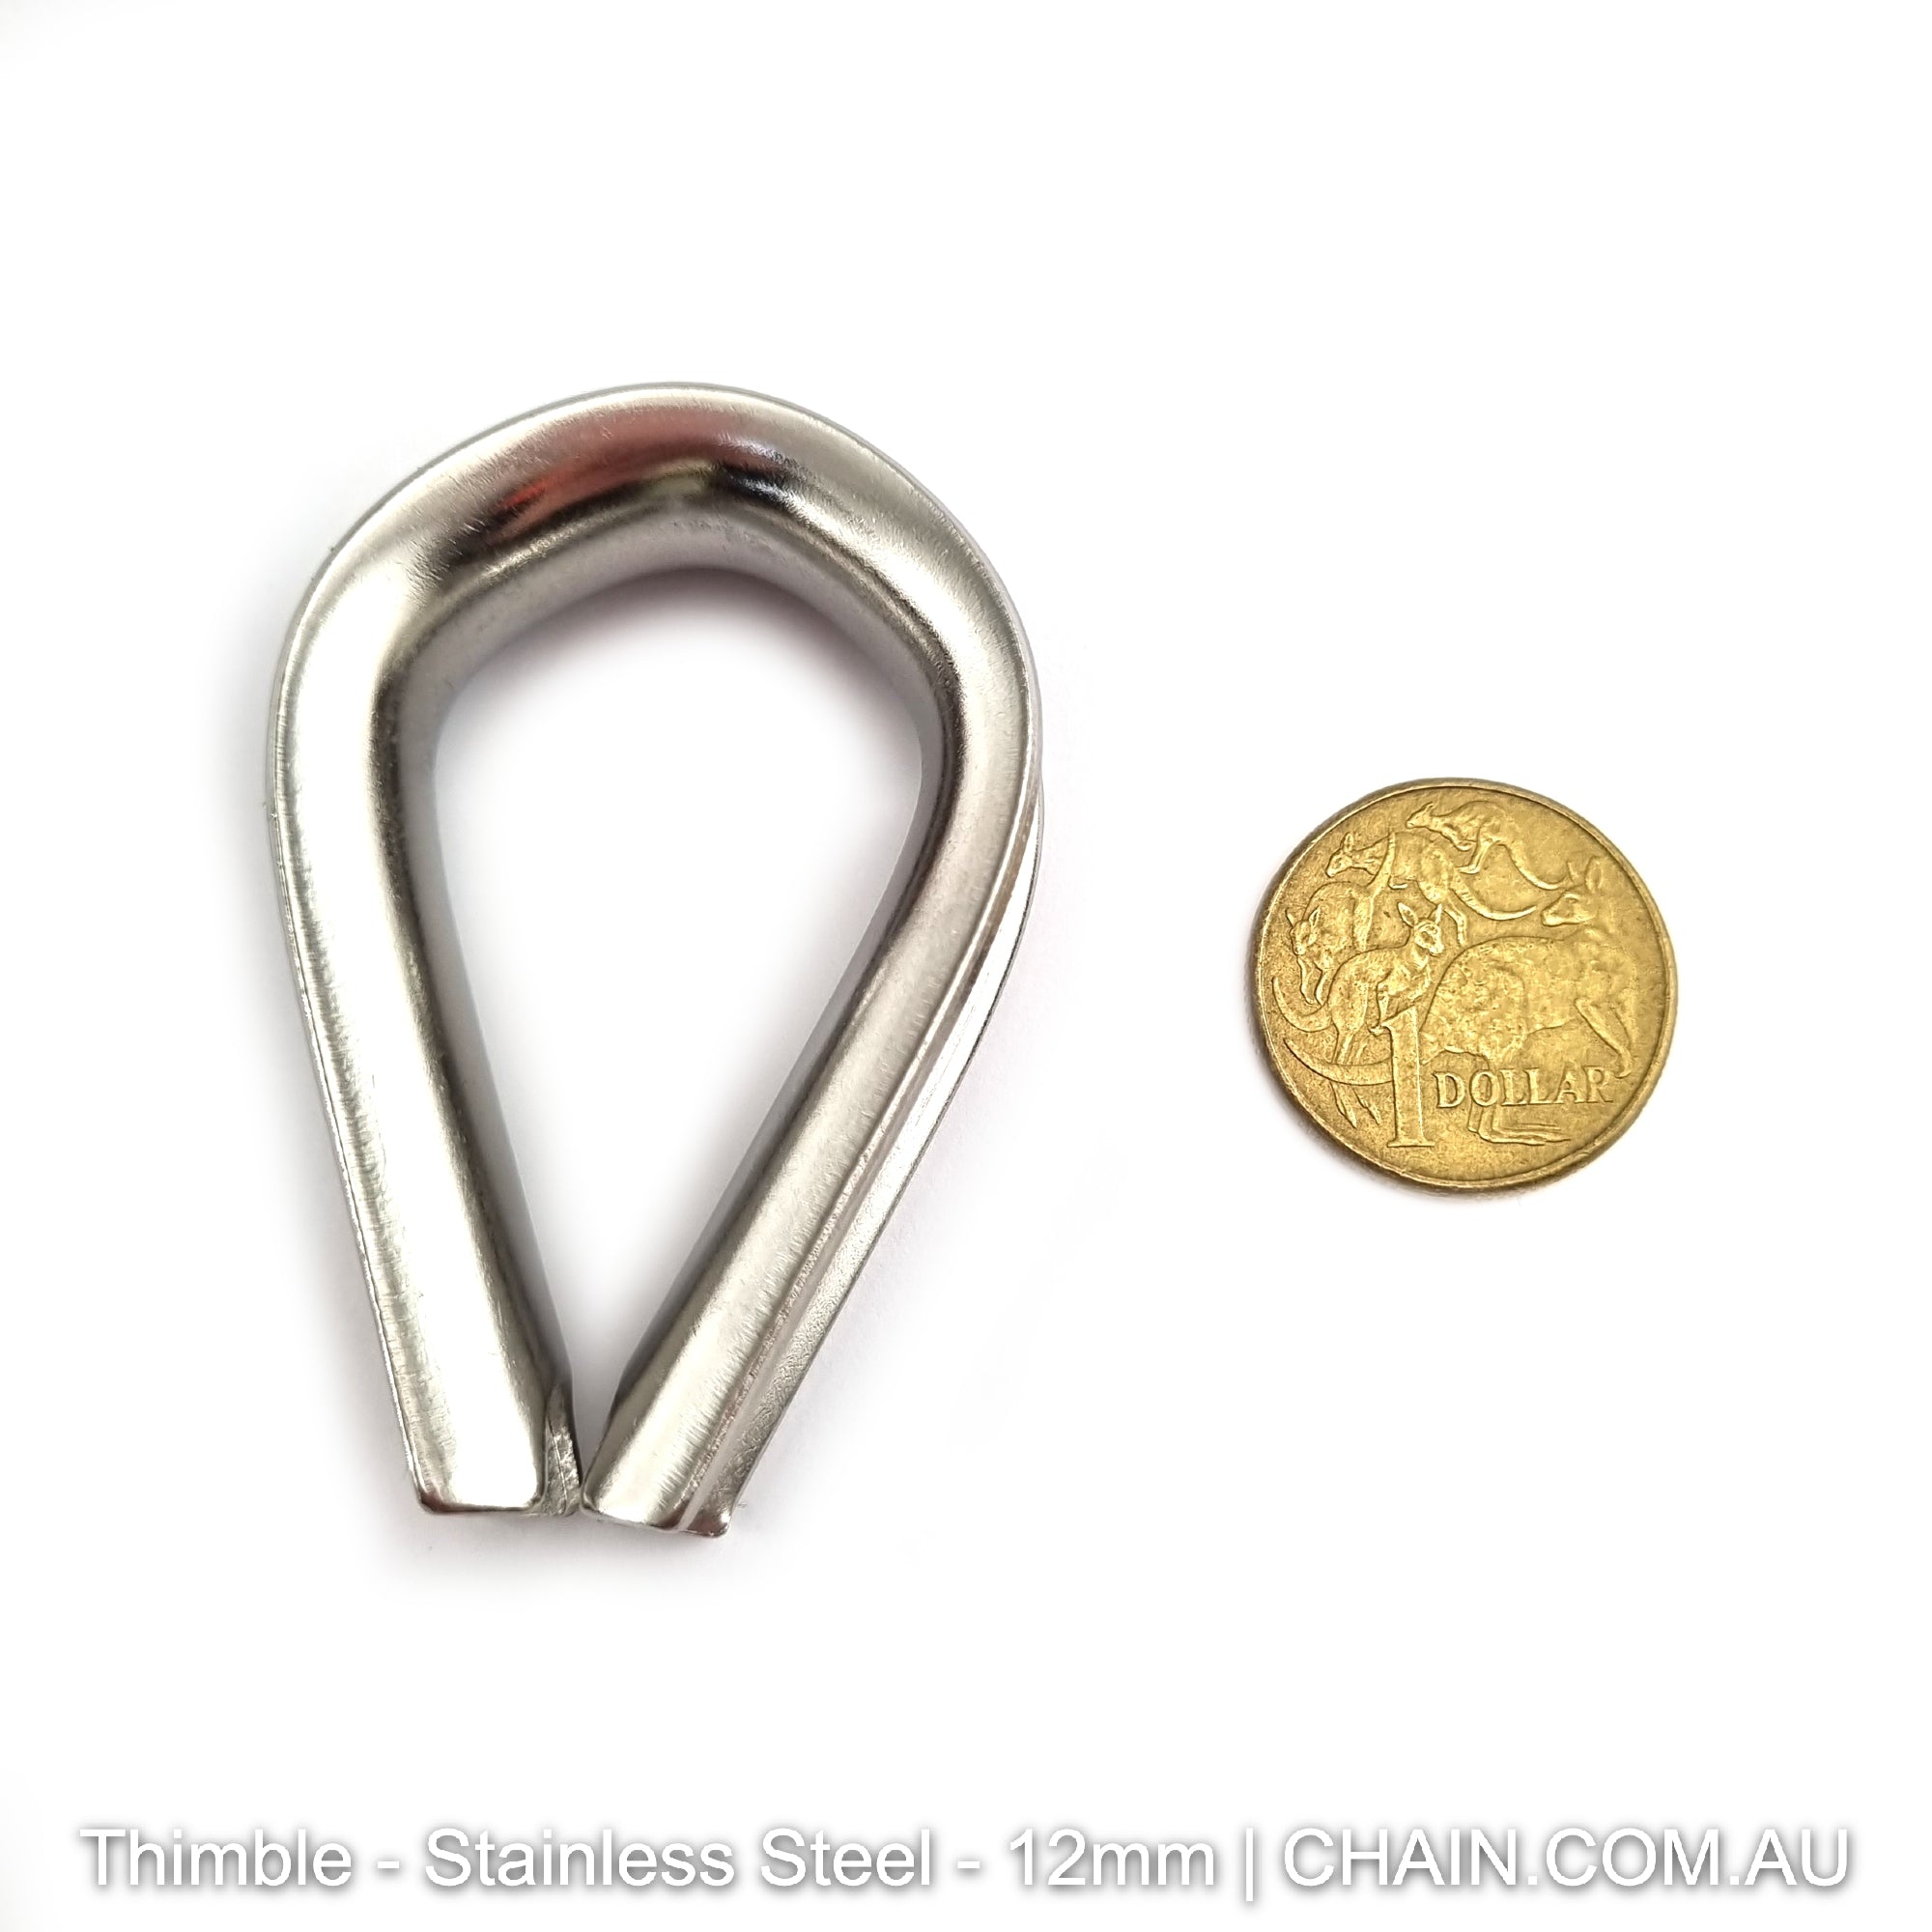 Stainless steel thimble, size 12mm in type 316 marine grade stainless steel. Shop hardware online. Australia wide shipping + Melbourne click & collect.